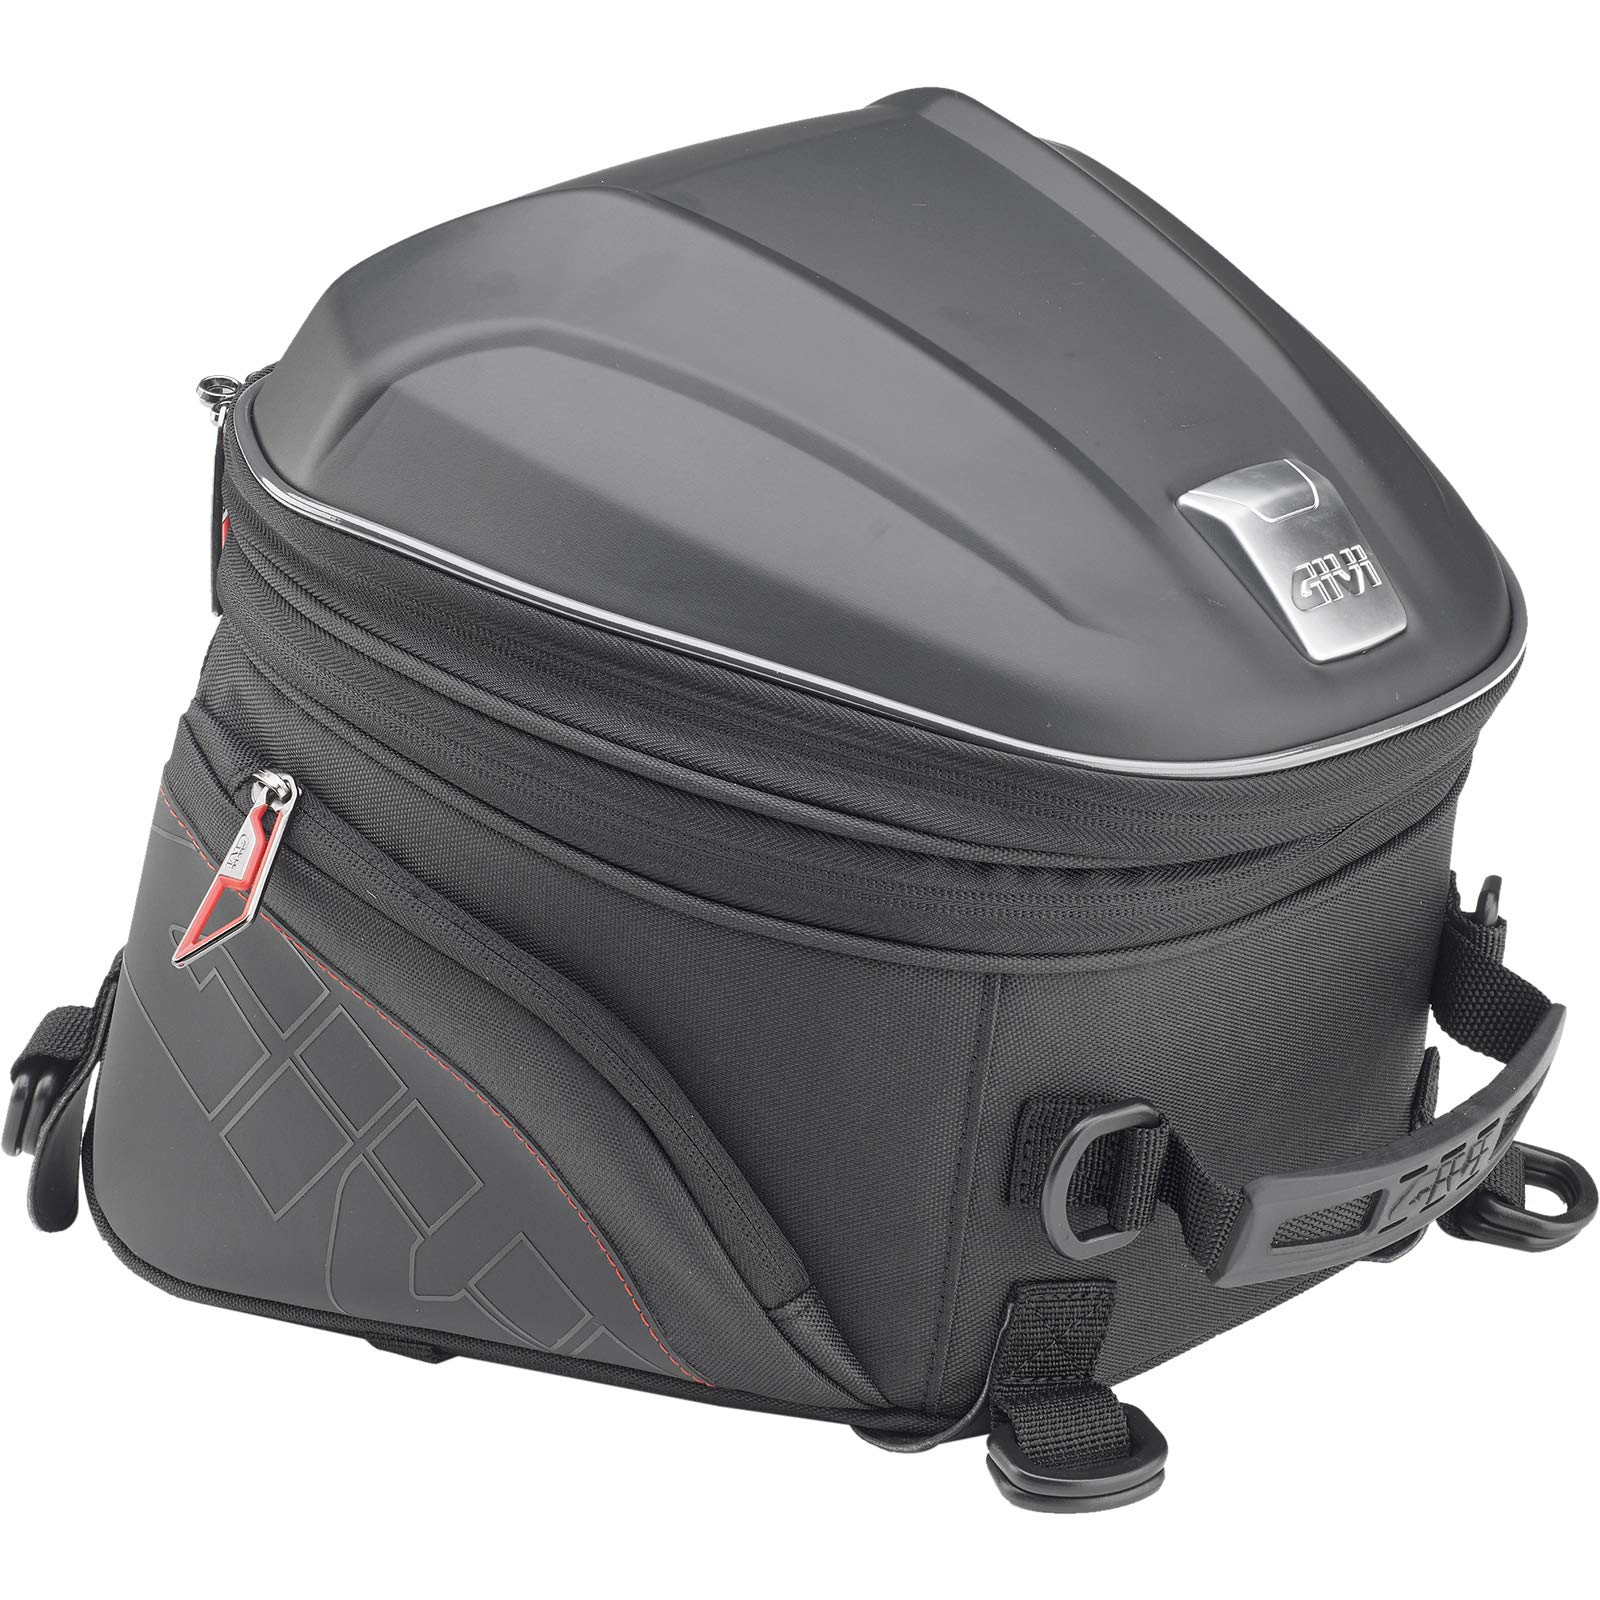 ST607B Saddle Bag Expandable THERMOFORMED Capacity 22 LITERS. von Givi